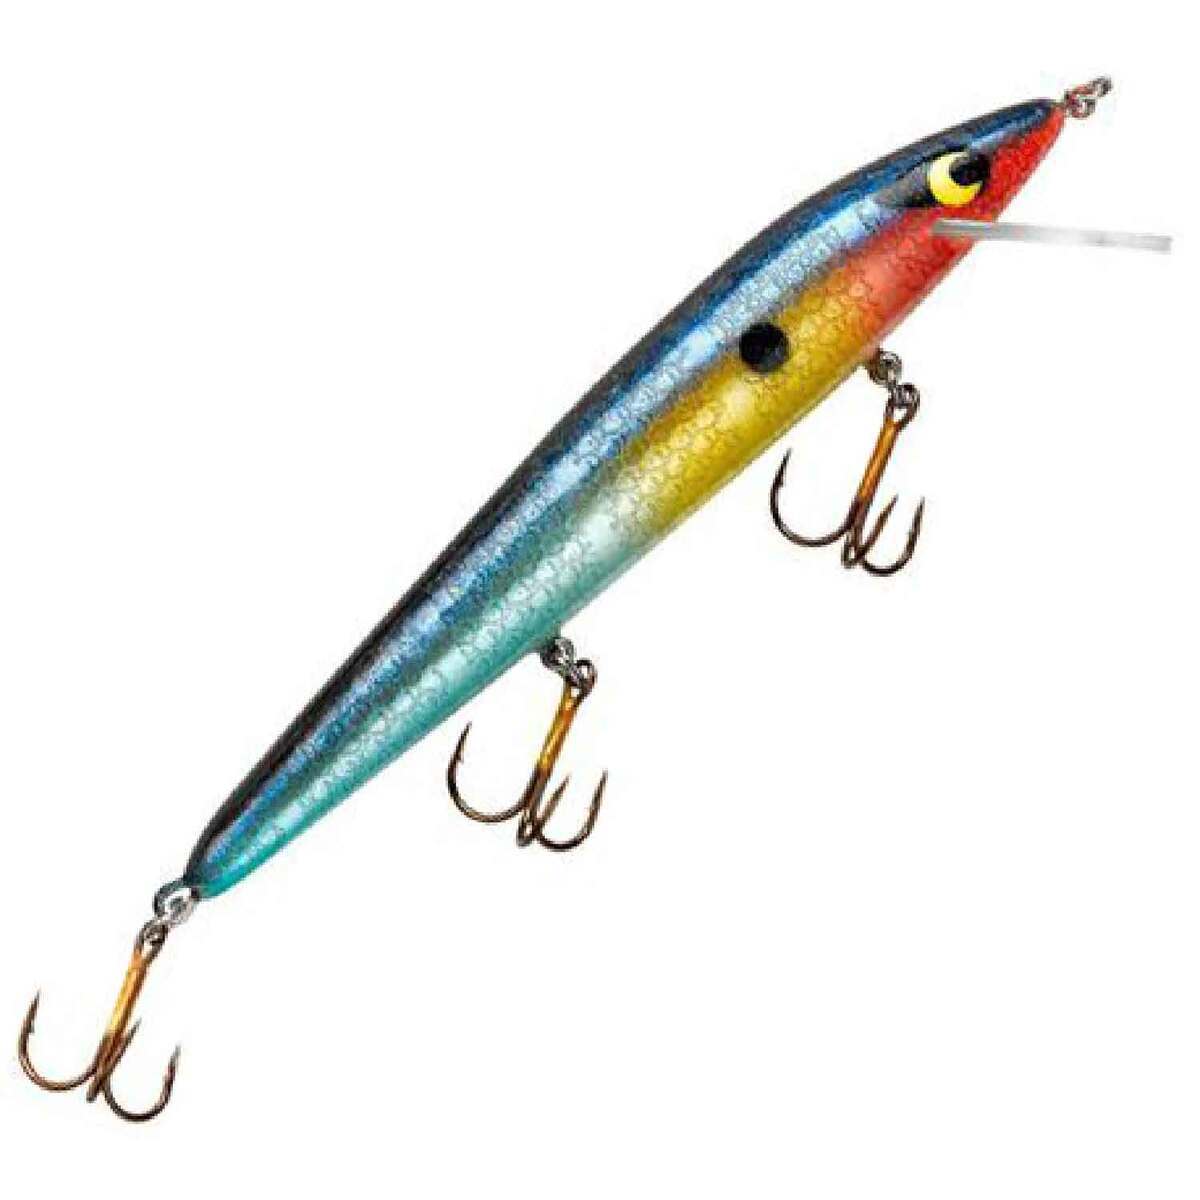 Smithwick Lures Suspending Super Rogue Fishing Lure